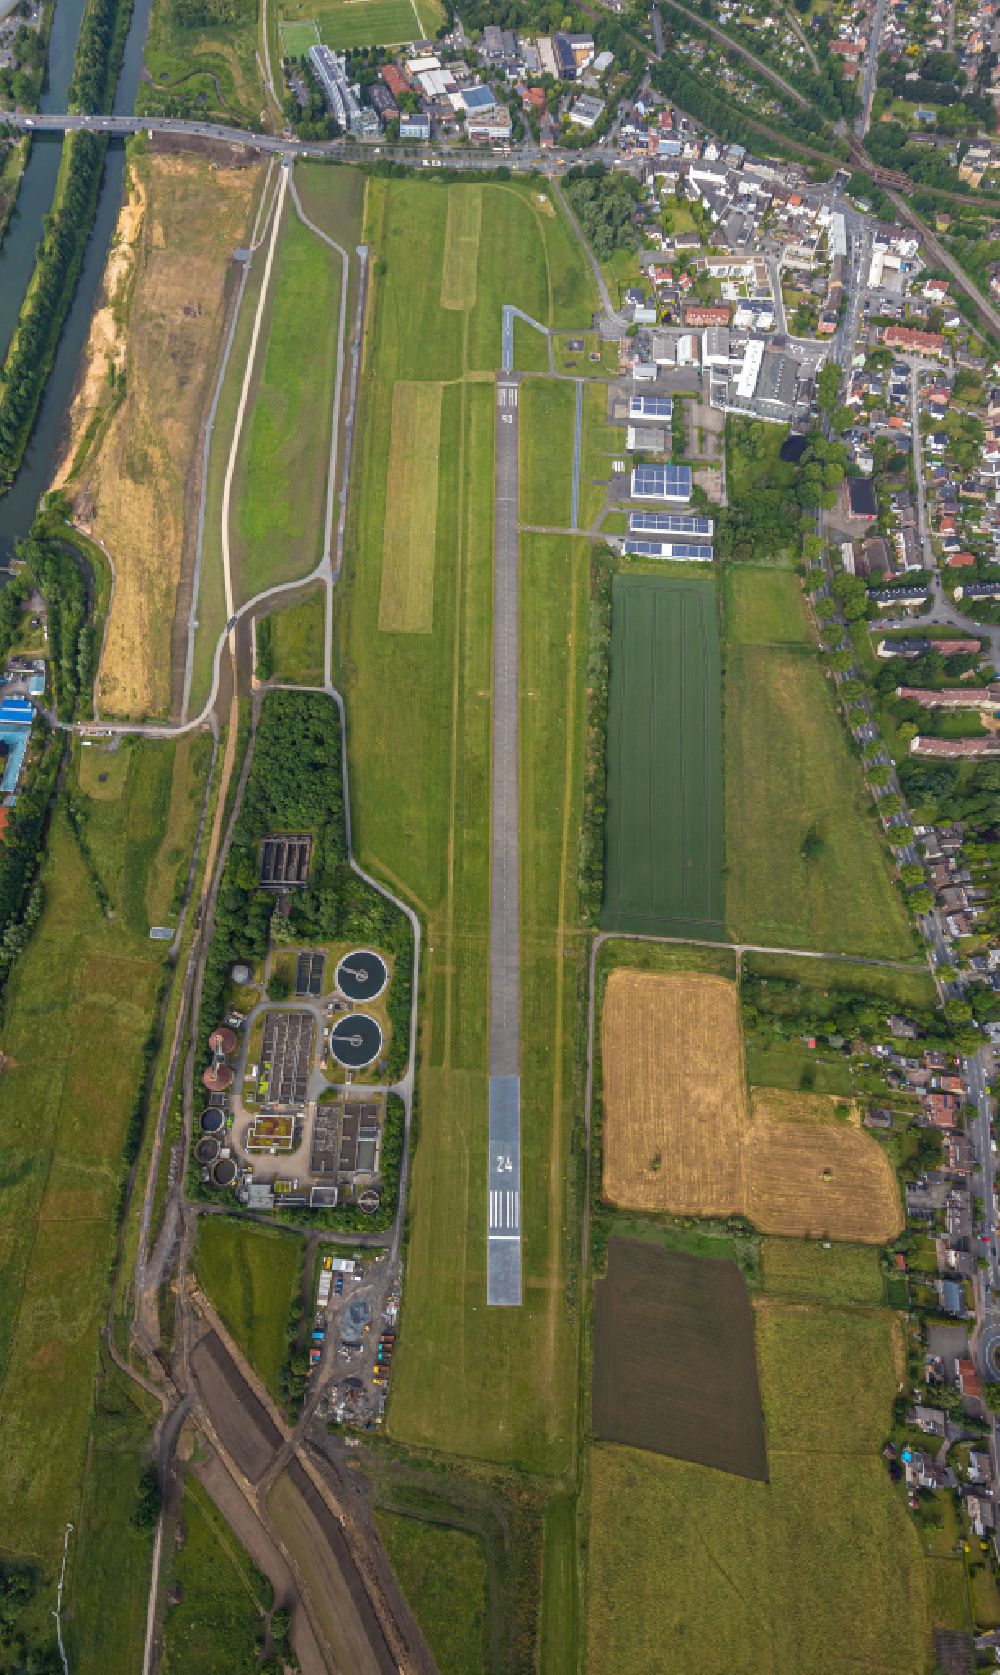 Aerial image Hamm (Westfalen) - Runway and taxiway area of the Hamm-Lippewiesen EDLH airfield and floodplain landscape of the Erlebnisraum Lippe on the Lippe River in the Heessen district of Hamm in the German state of North Rhine-Westphalia